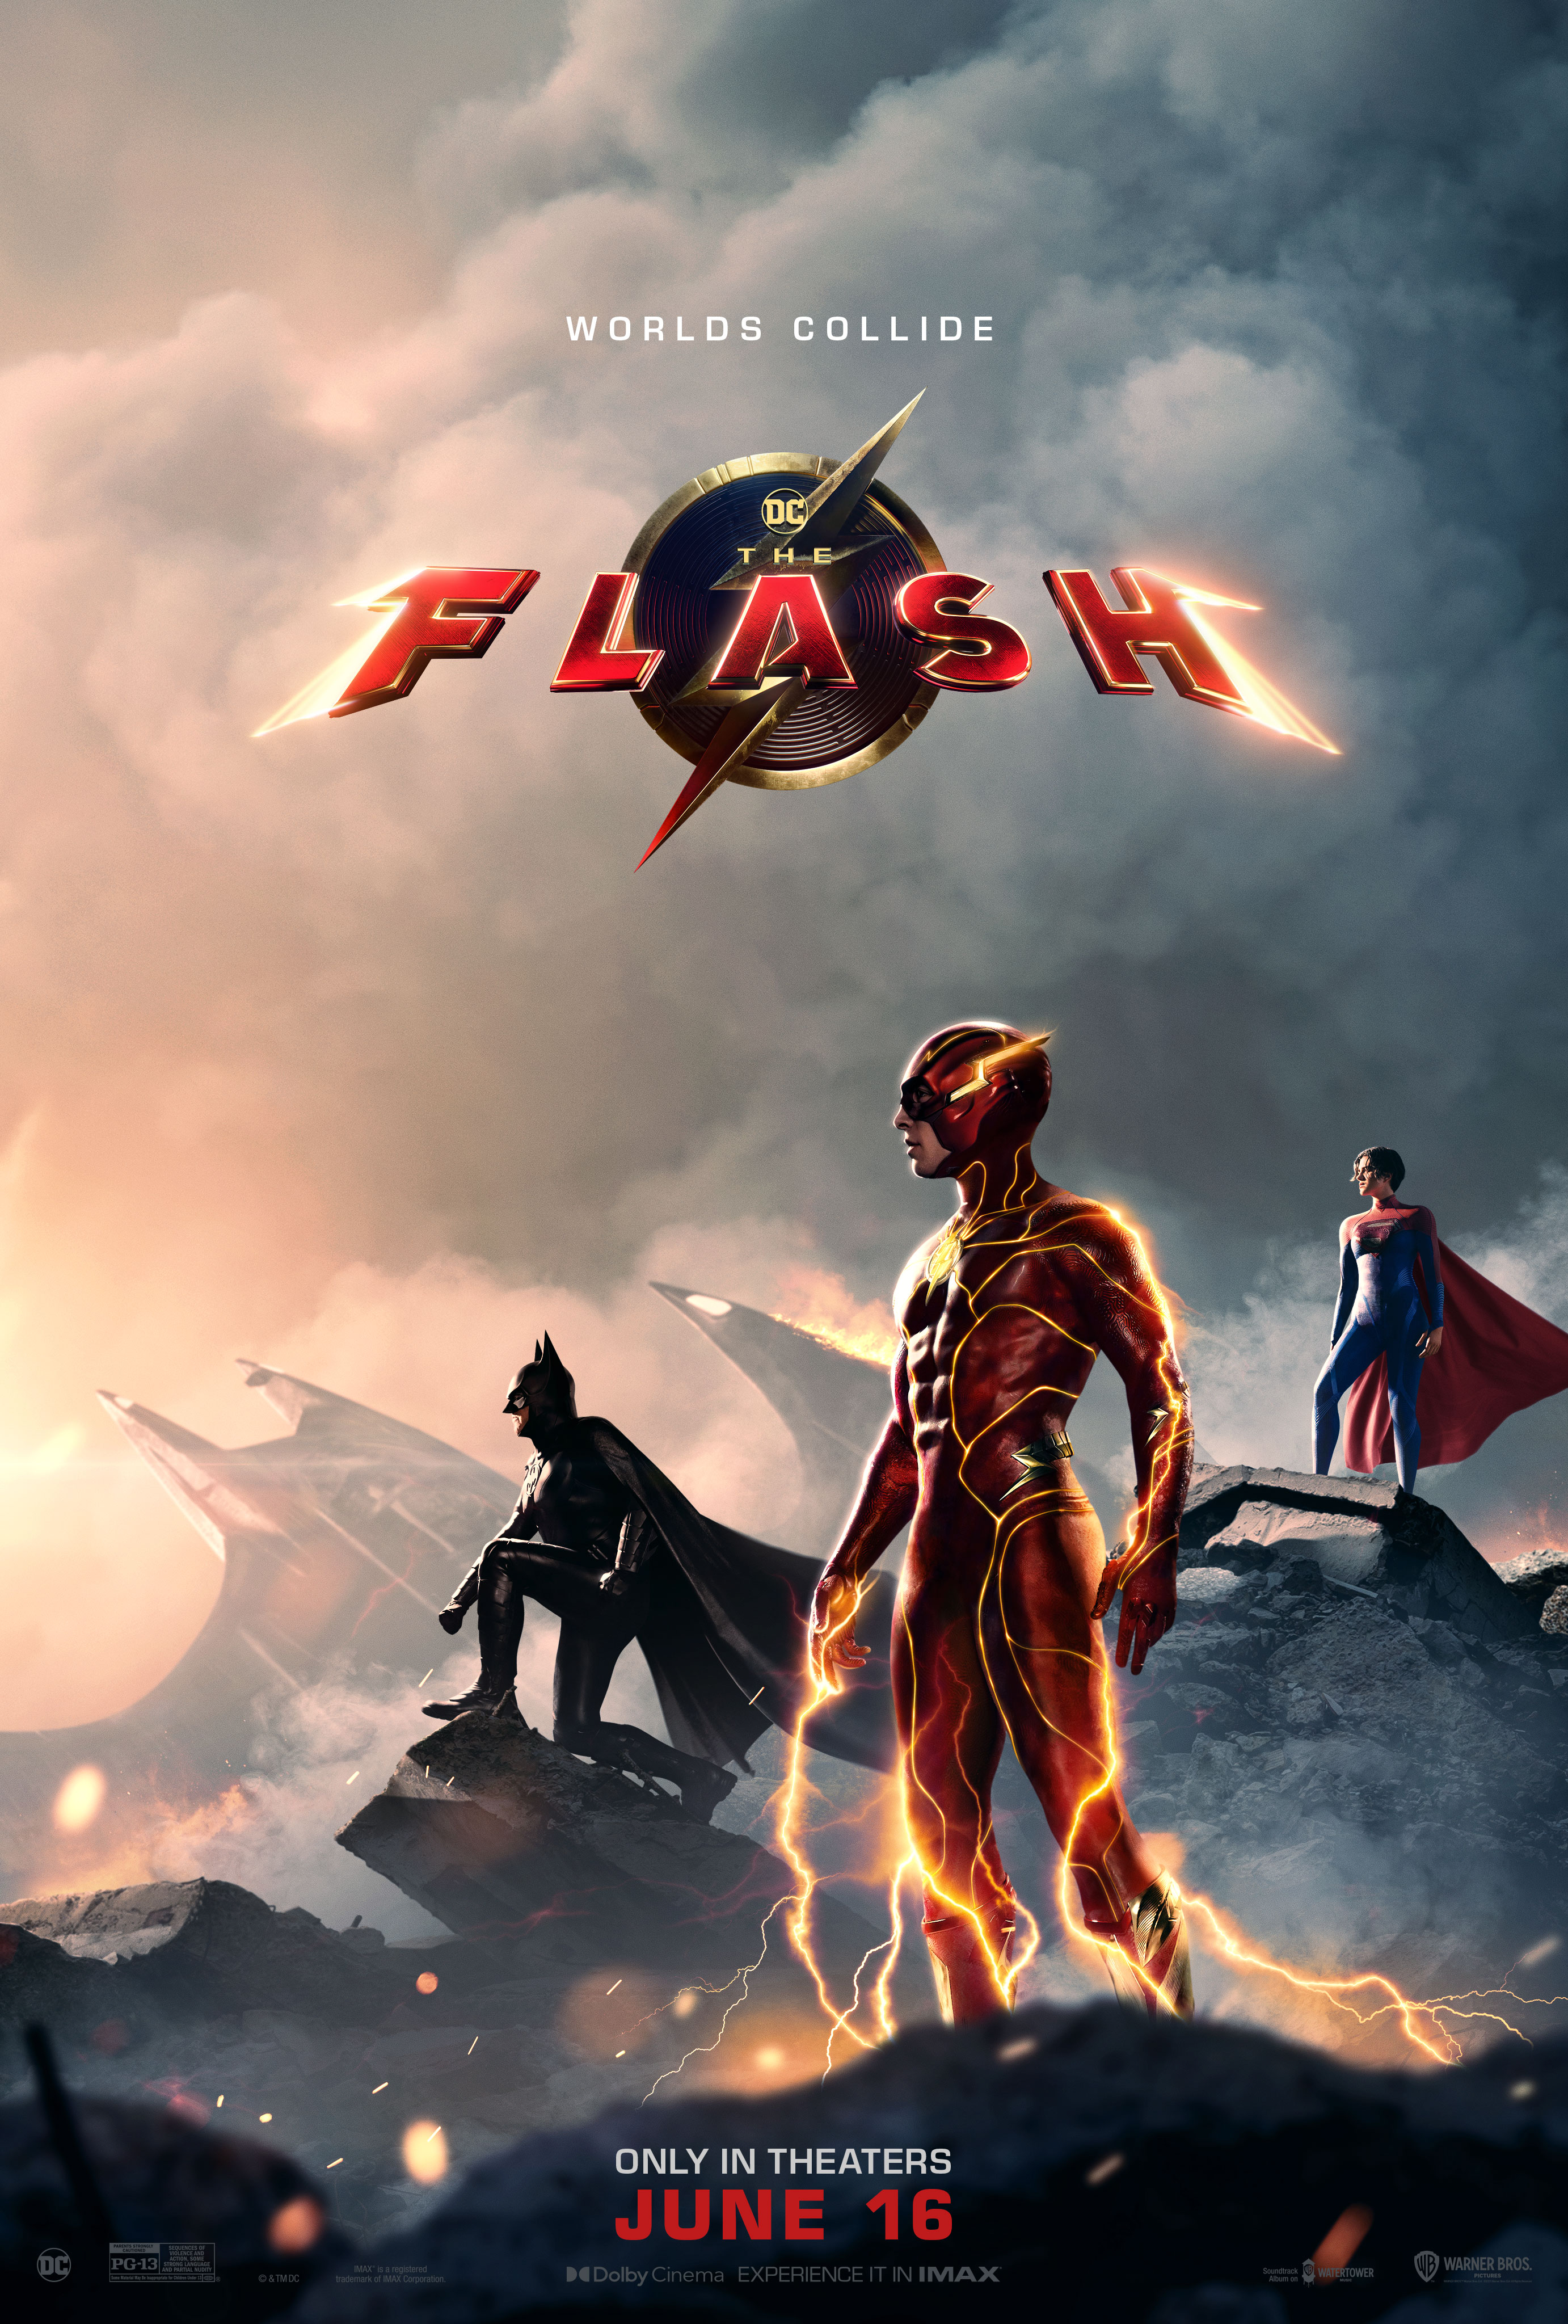 The Flash poster (Warner Bros. Pictures)